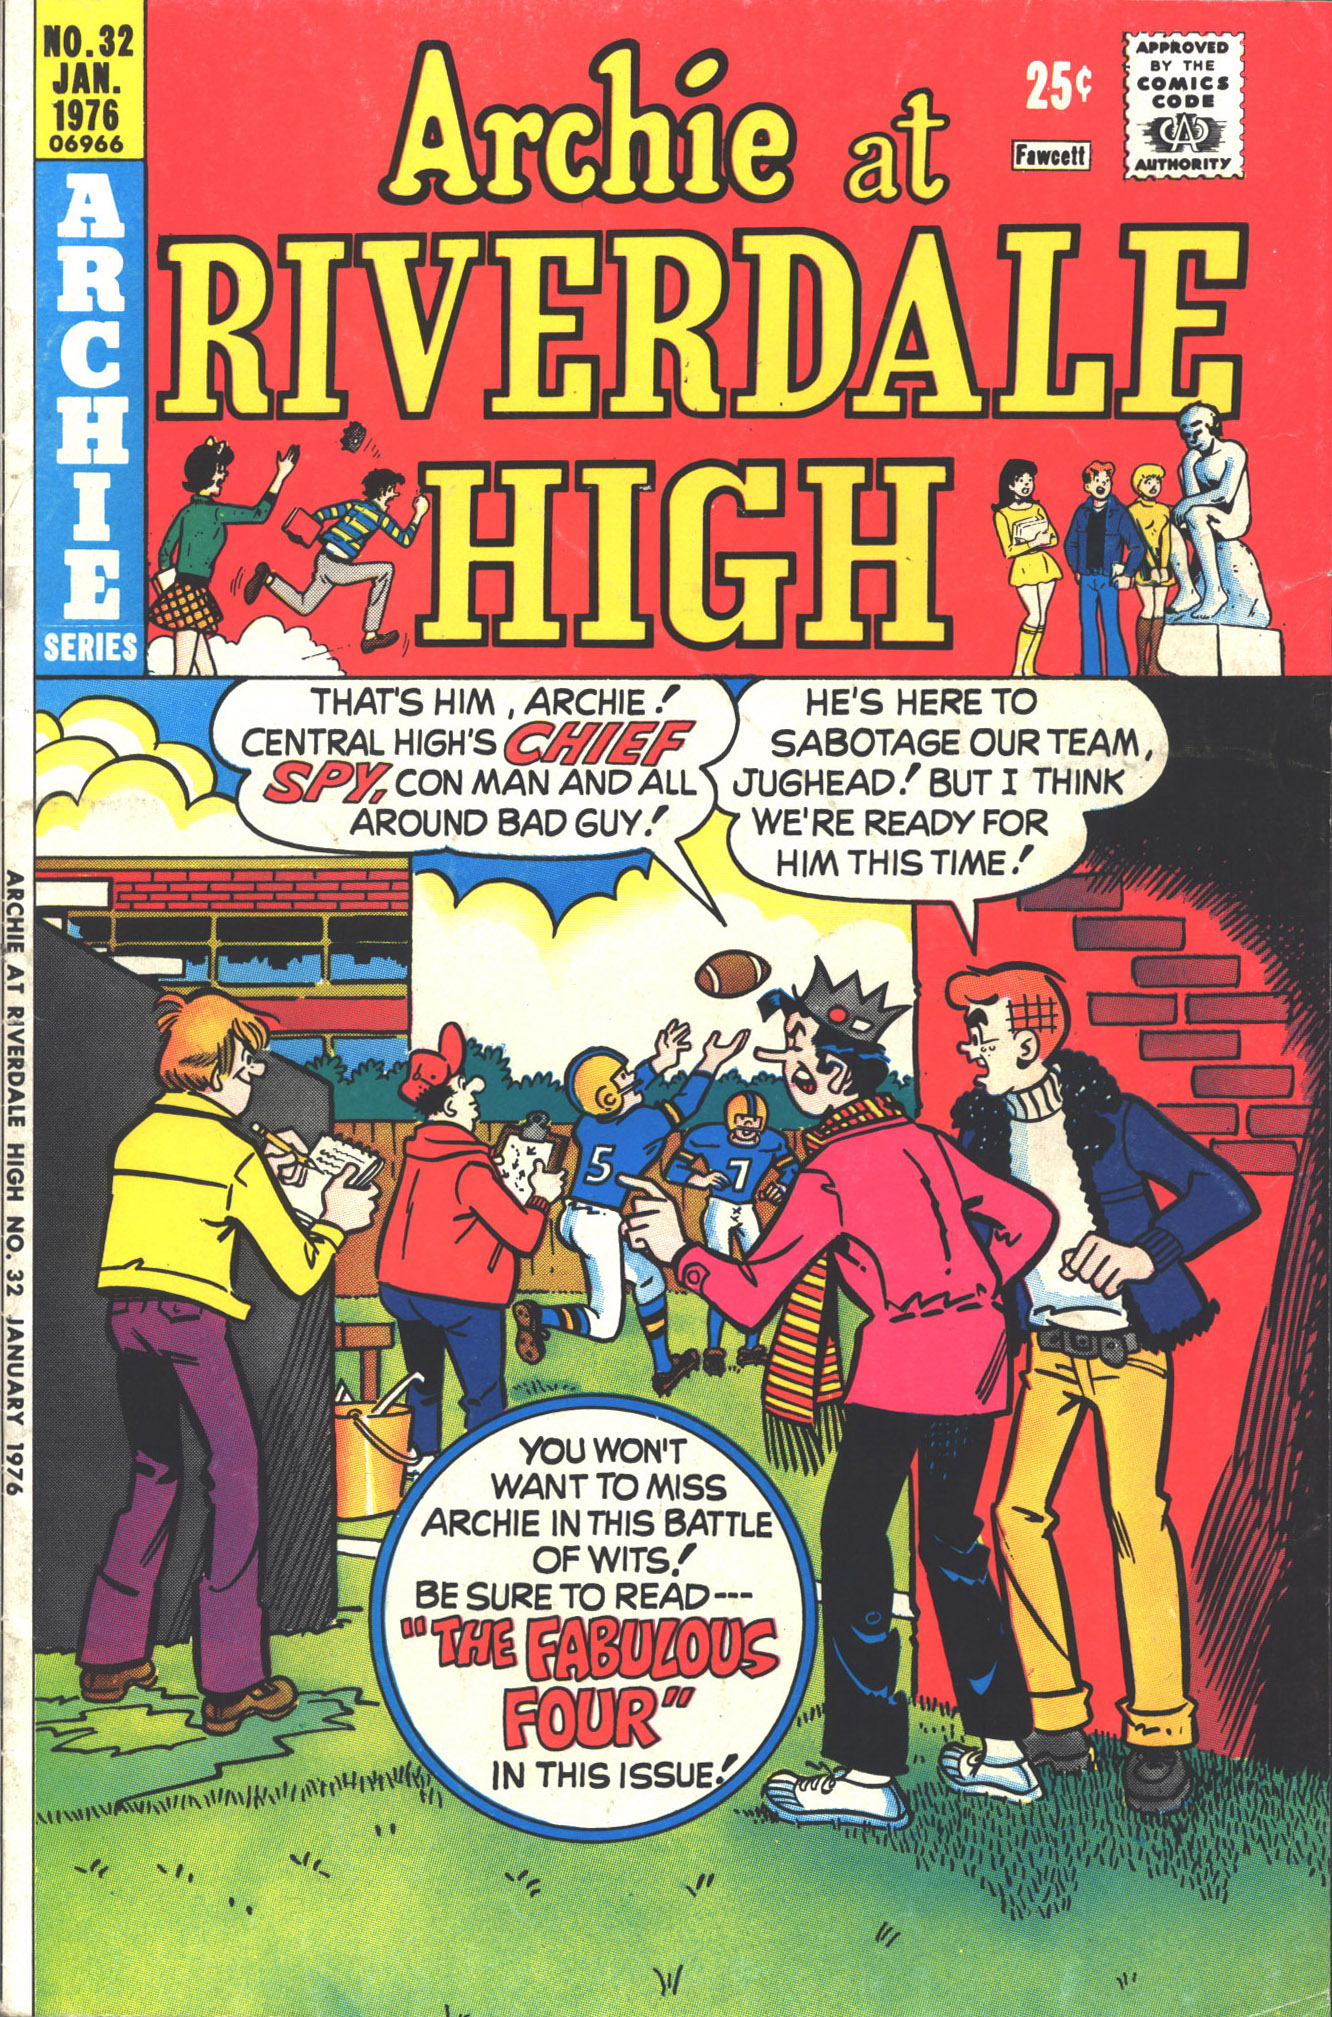 Read online Archie at Riverdale High (1972) comic -  Issue #32 - 1